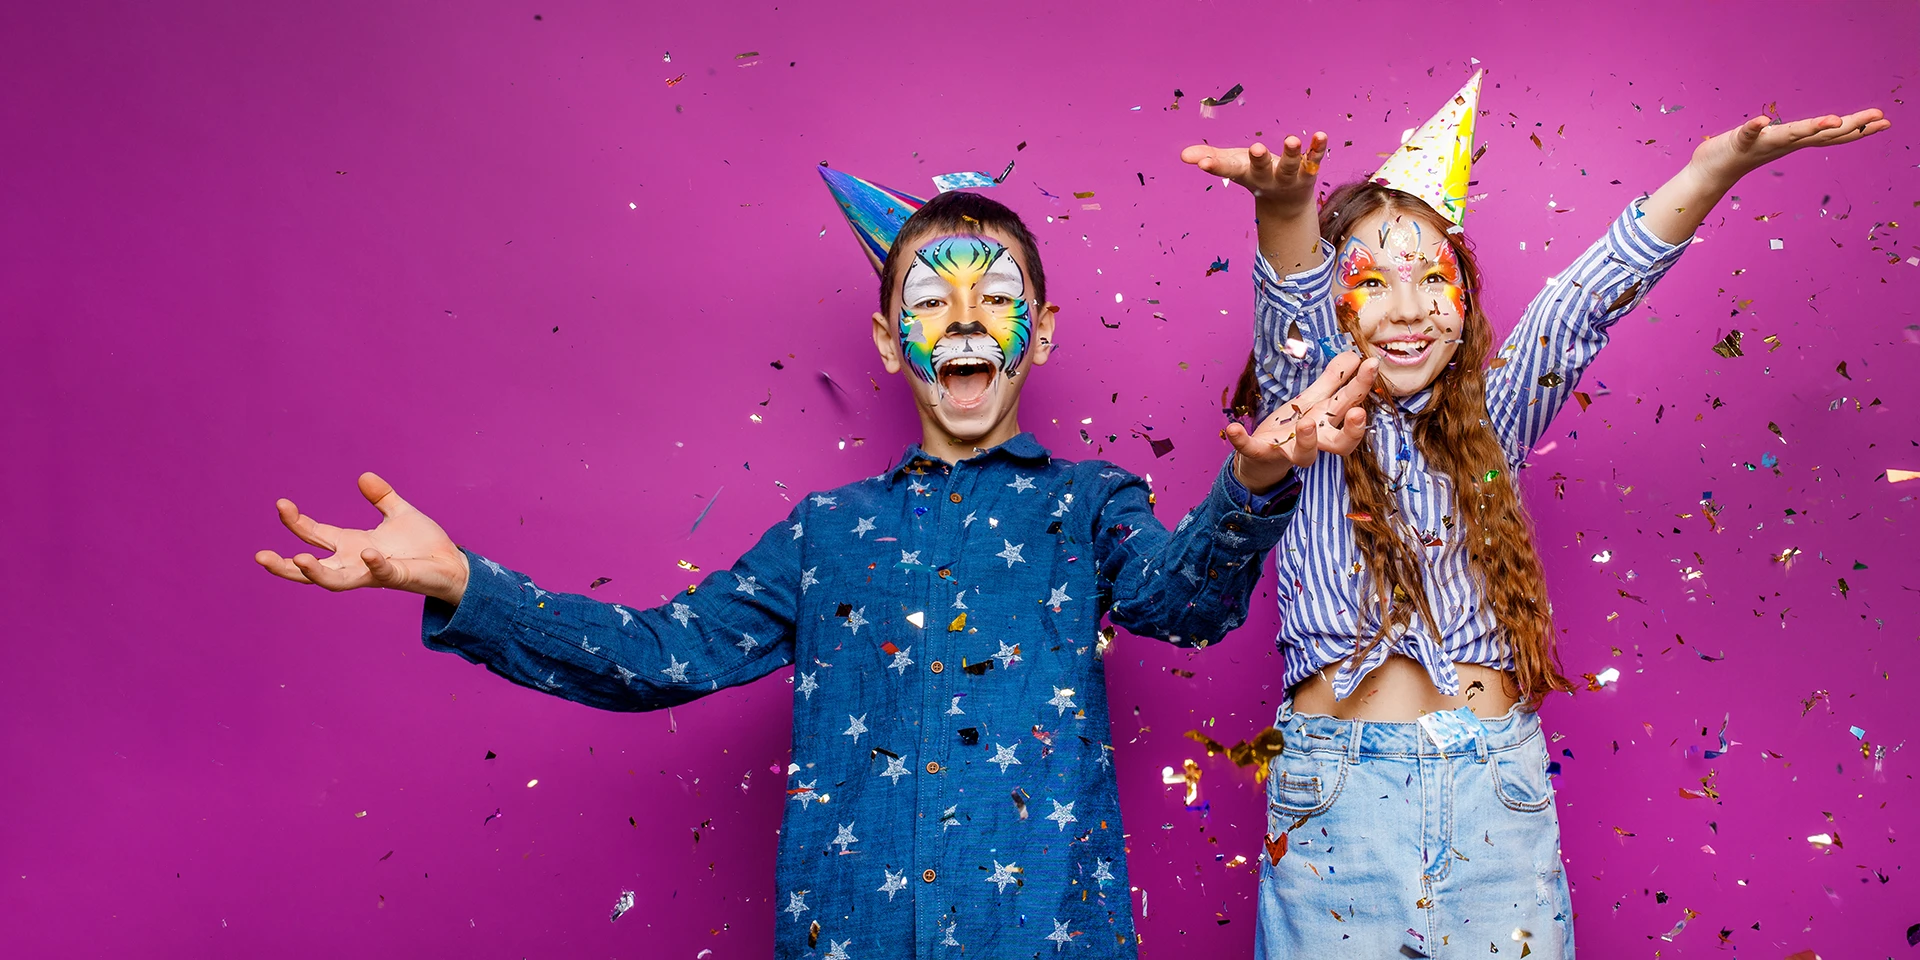 Two children celebrating with confetti and party hats